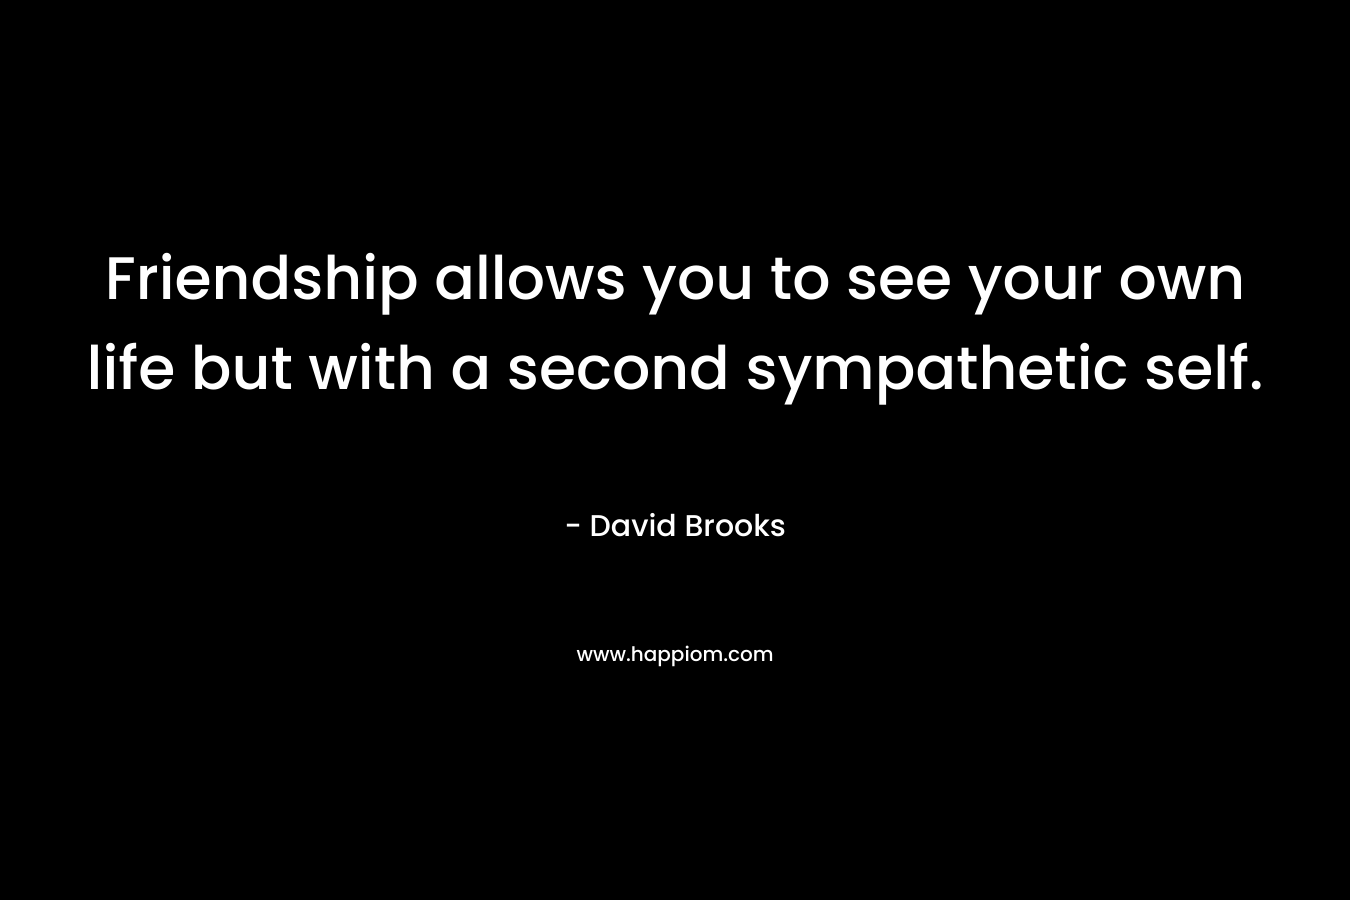 Friendship allows you to see your own life but with a second sympathetic self. – David Brooks